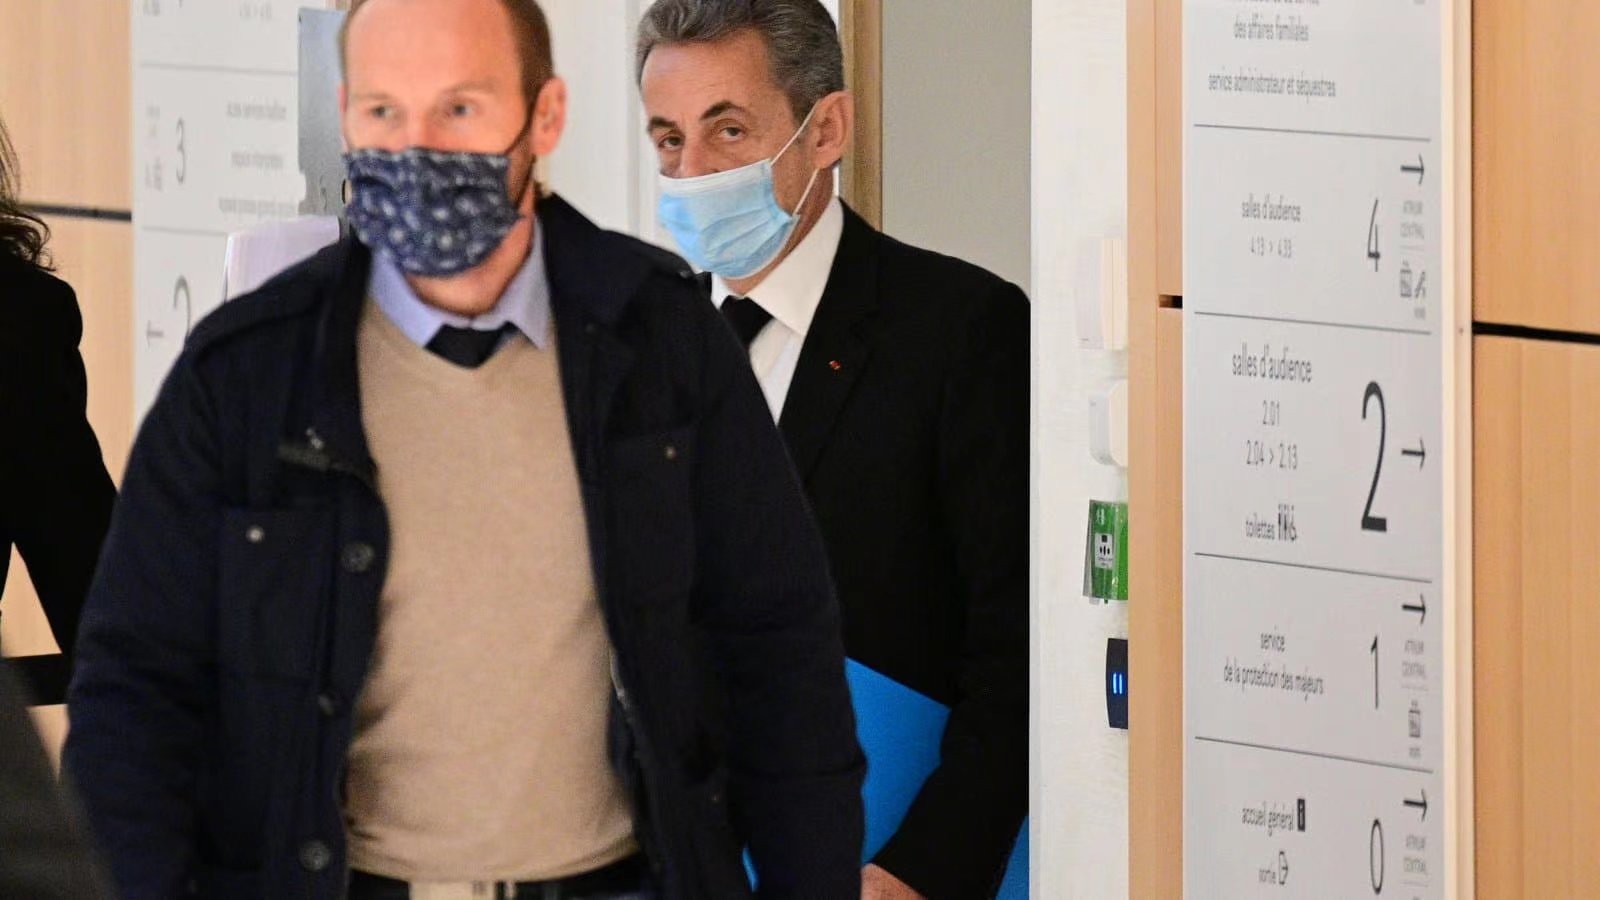 △The picture shows Sarkozy arriving at the trial site on the 7th, from the French media.